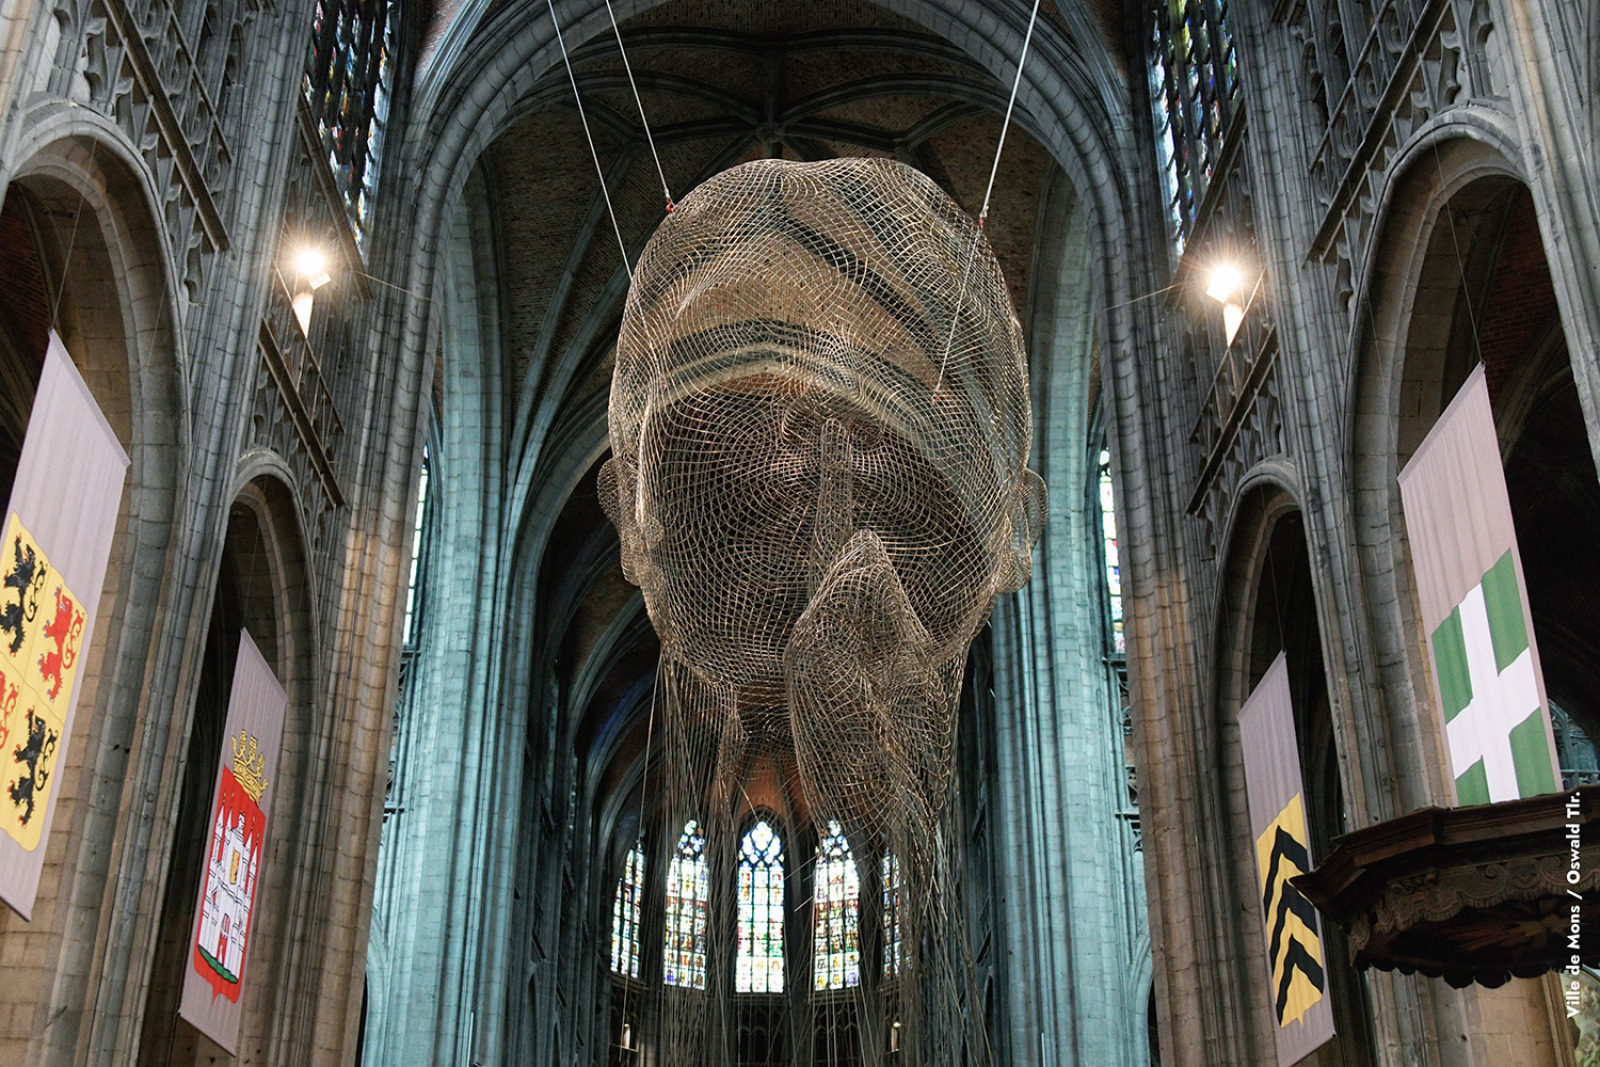 Carved face, suspended in the center of a church